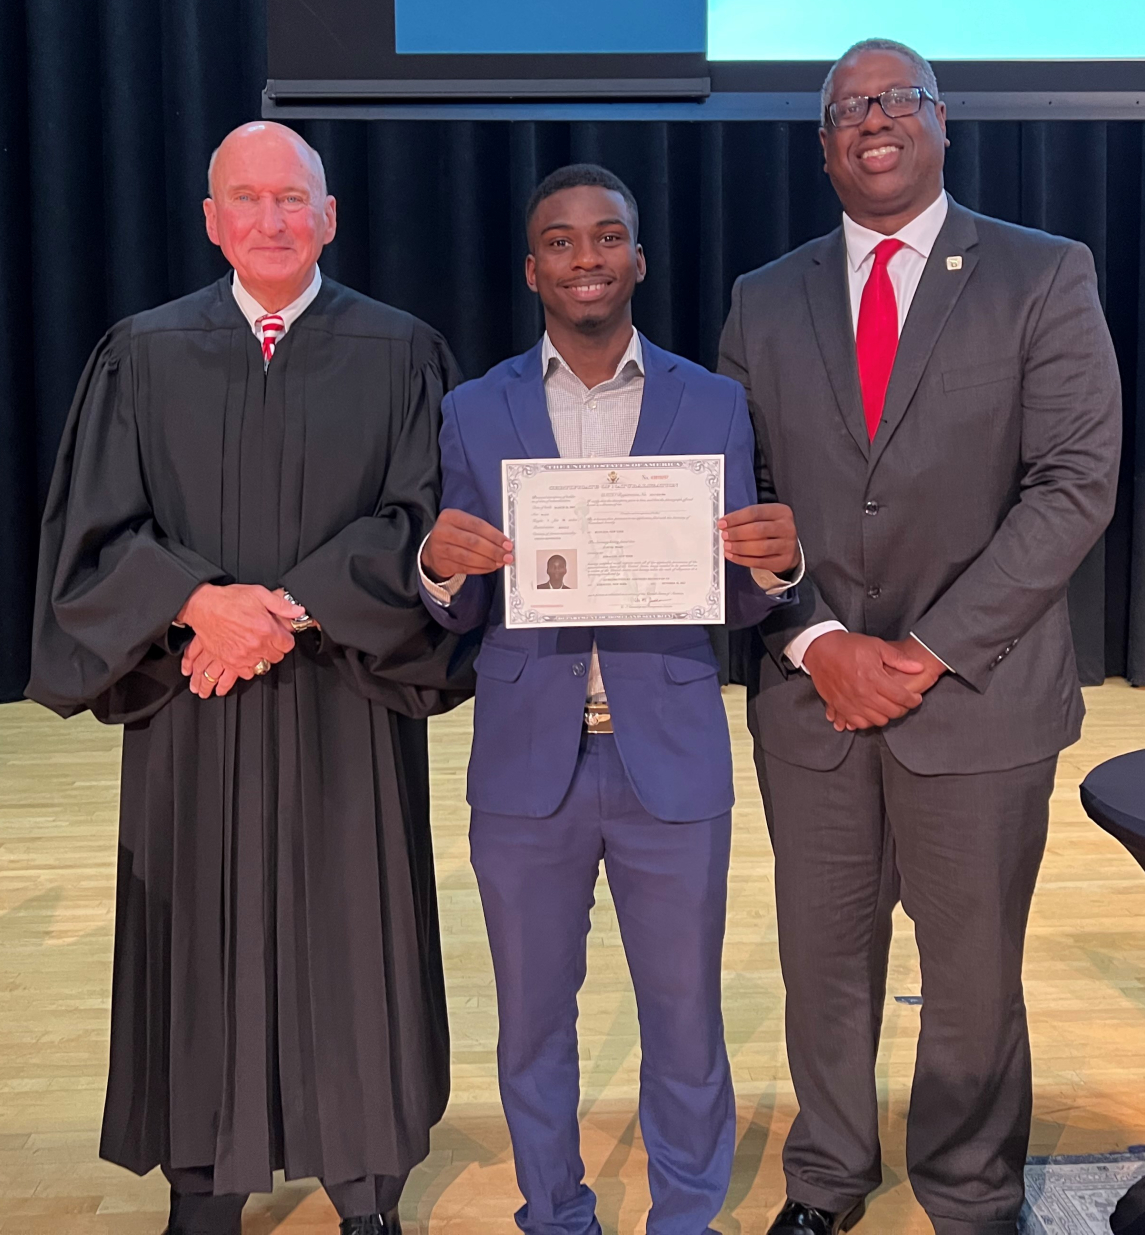 New American citizen and OCC student Juhudi Boazi (center) is pictured with Honorable Magistrate Judge David E. Peebles (left) and OCC President Dr. Warren Hilton (right).